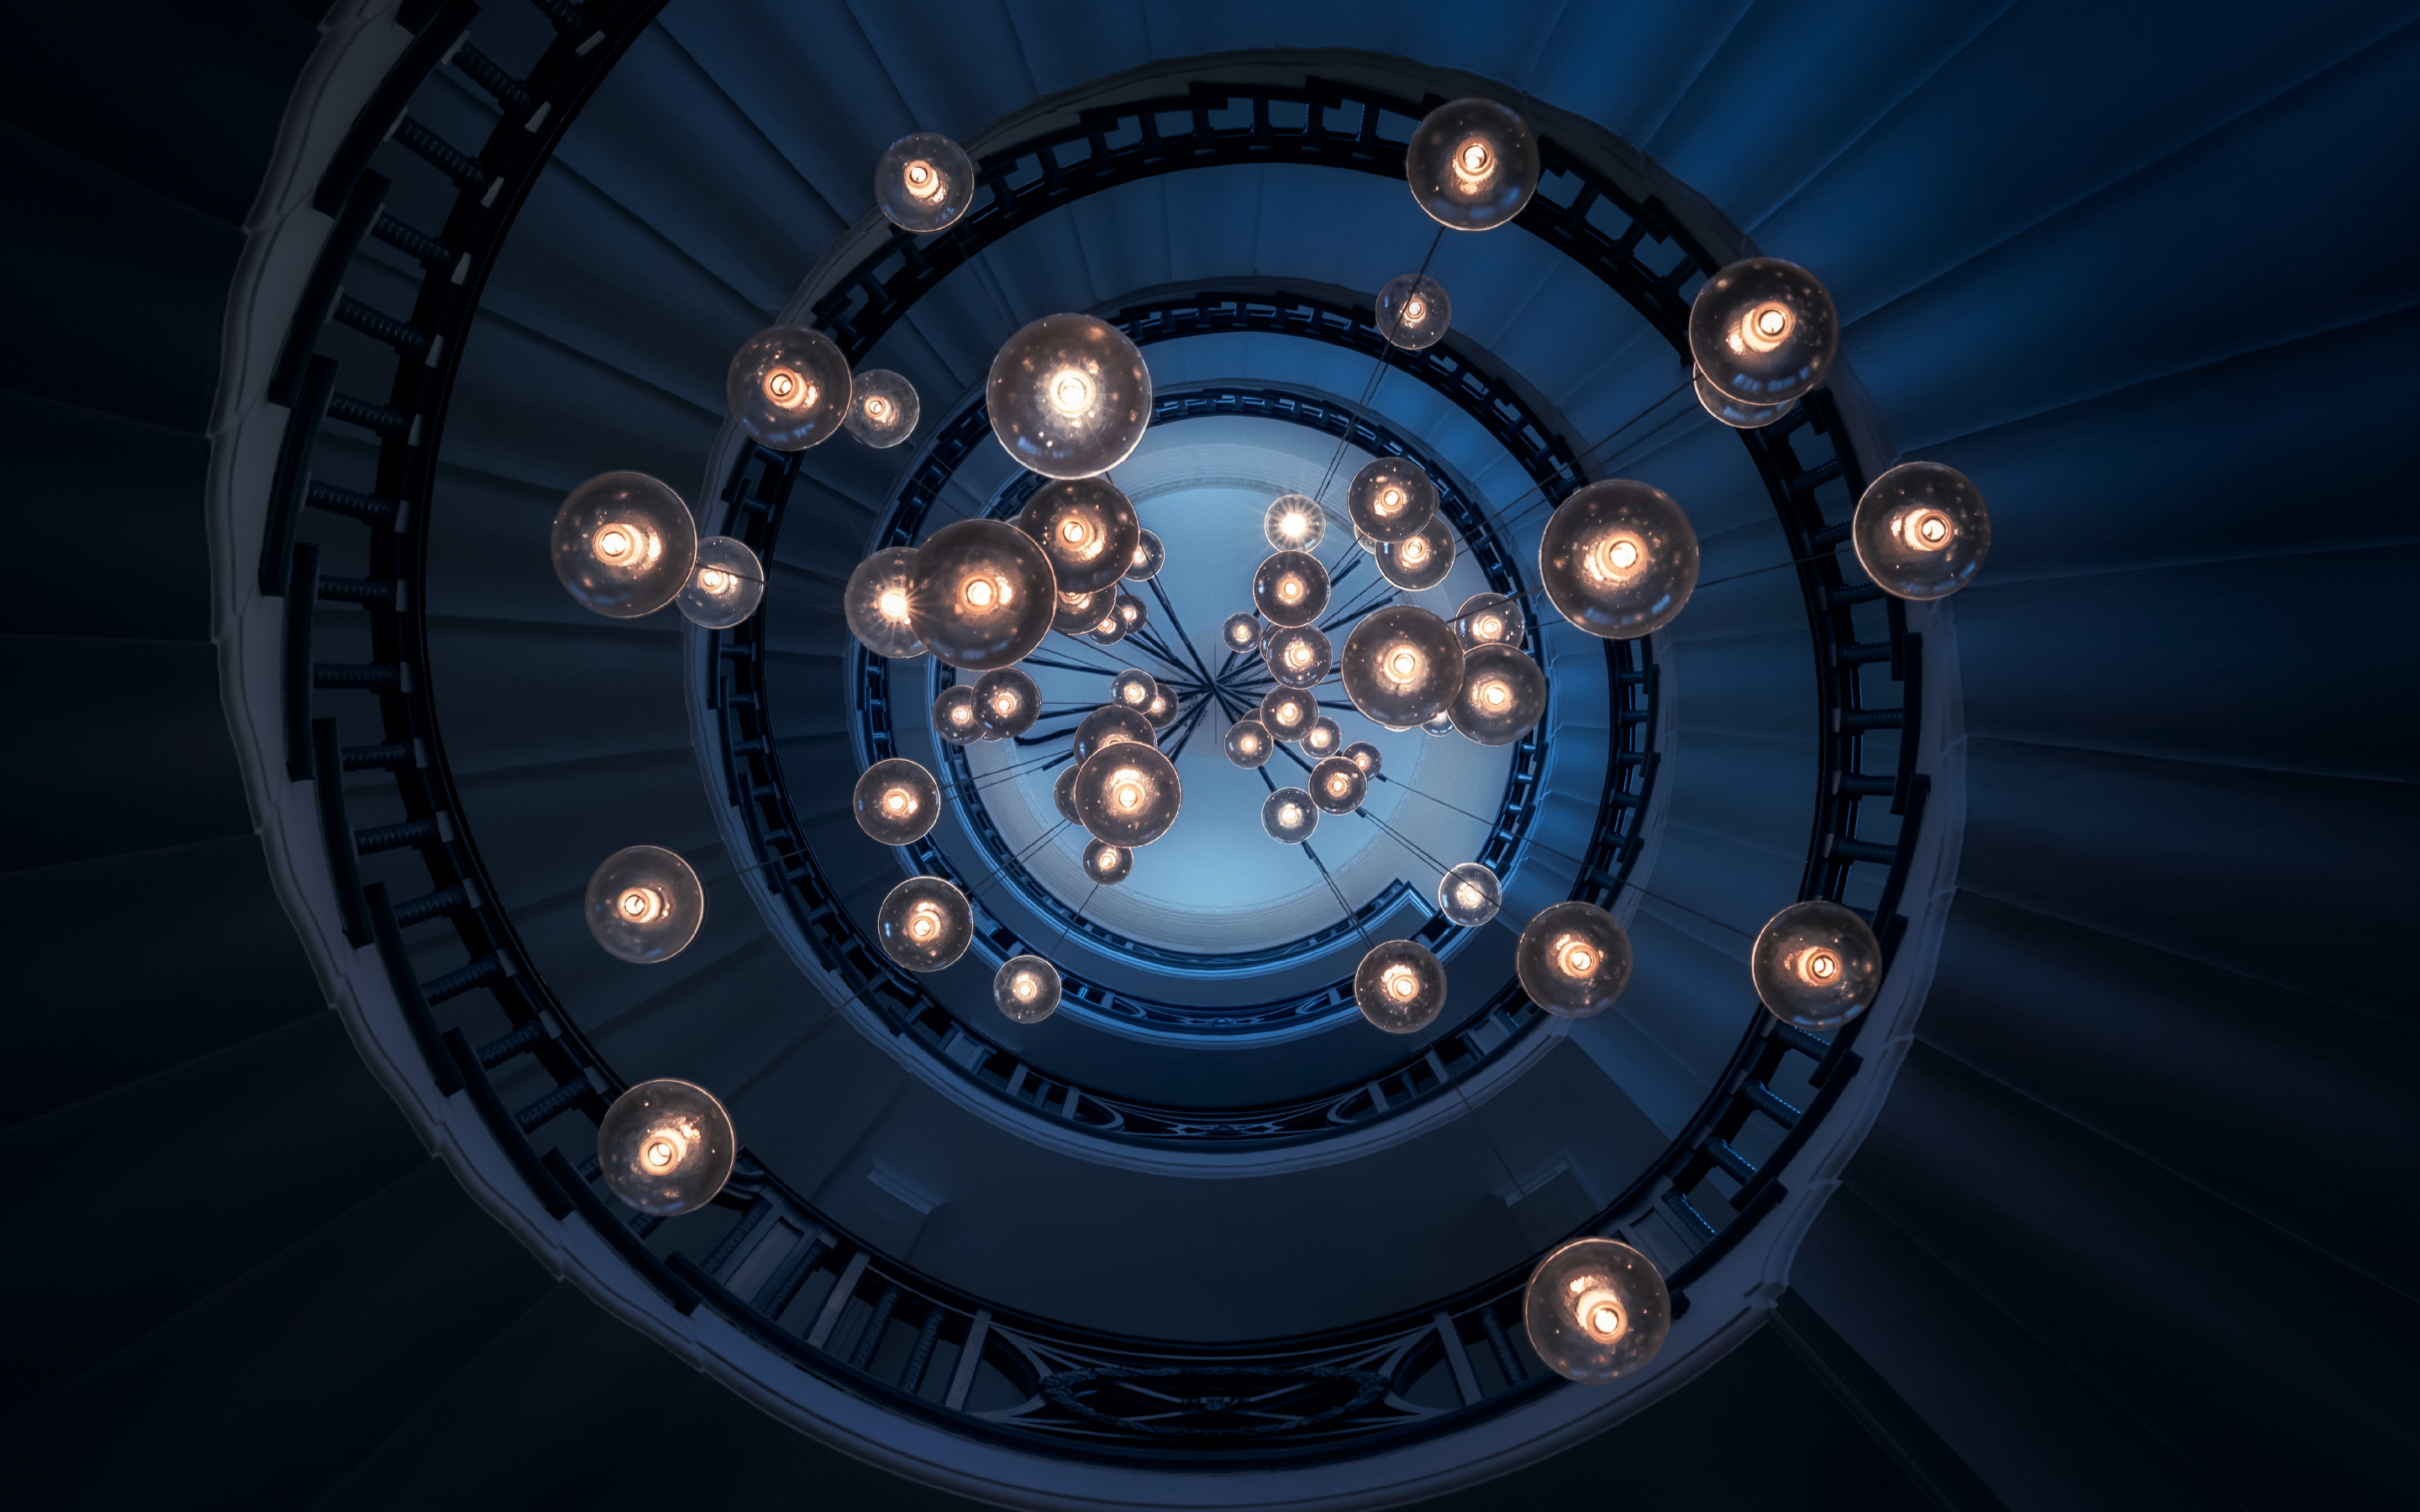 Staircase, lights, ceiling, spiral, architecture, interior, 2880x1800 wallpaper